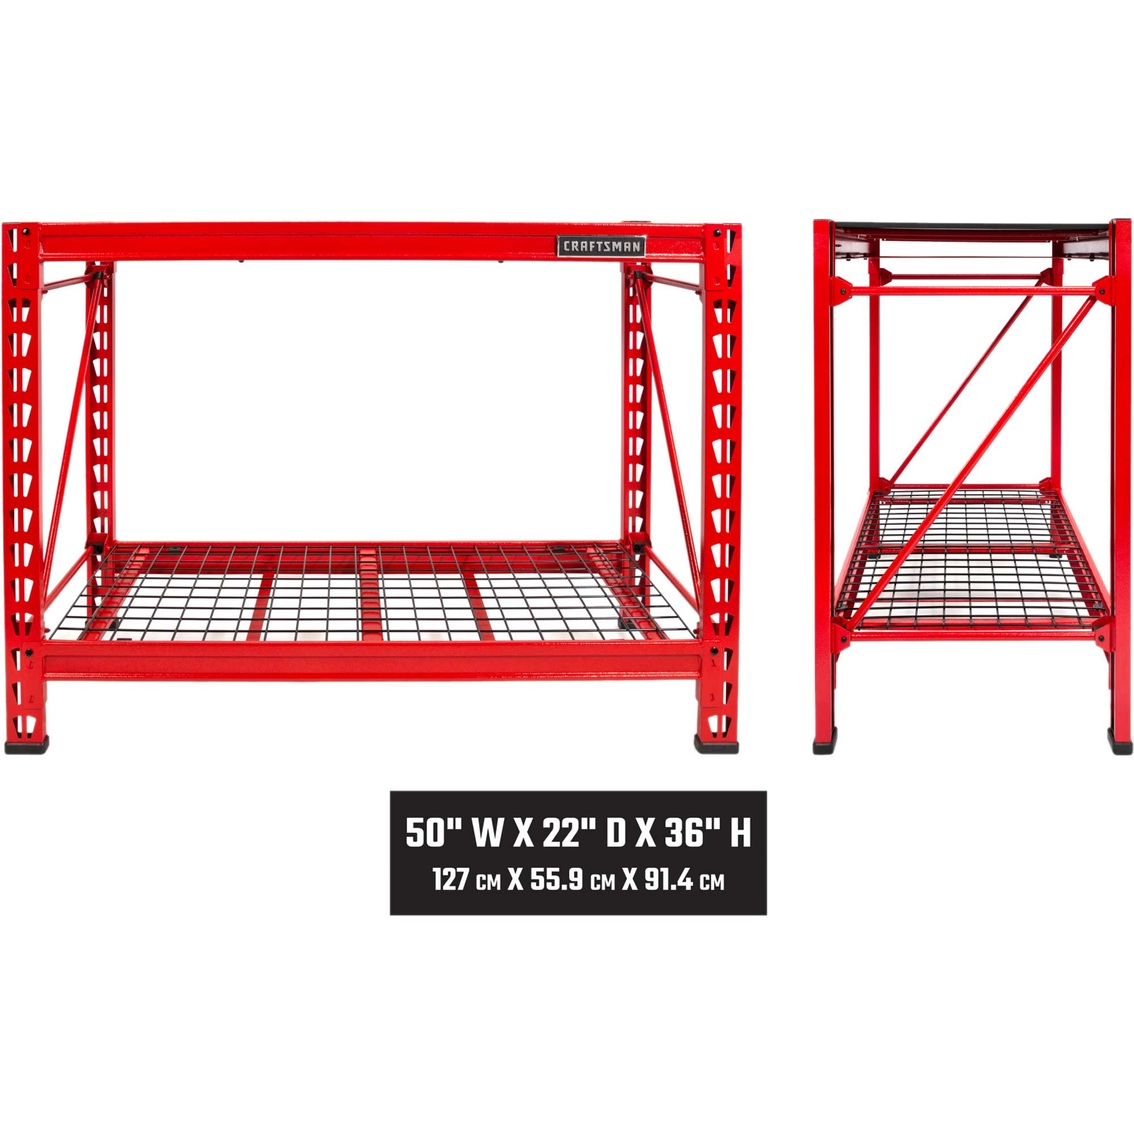 Craftsman 2-Shelf 3 ft. Tall Stackable Tool Chest Depth Storage Rack - Image 9 of 10